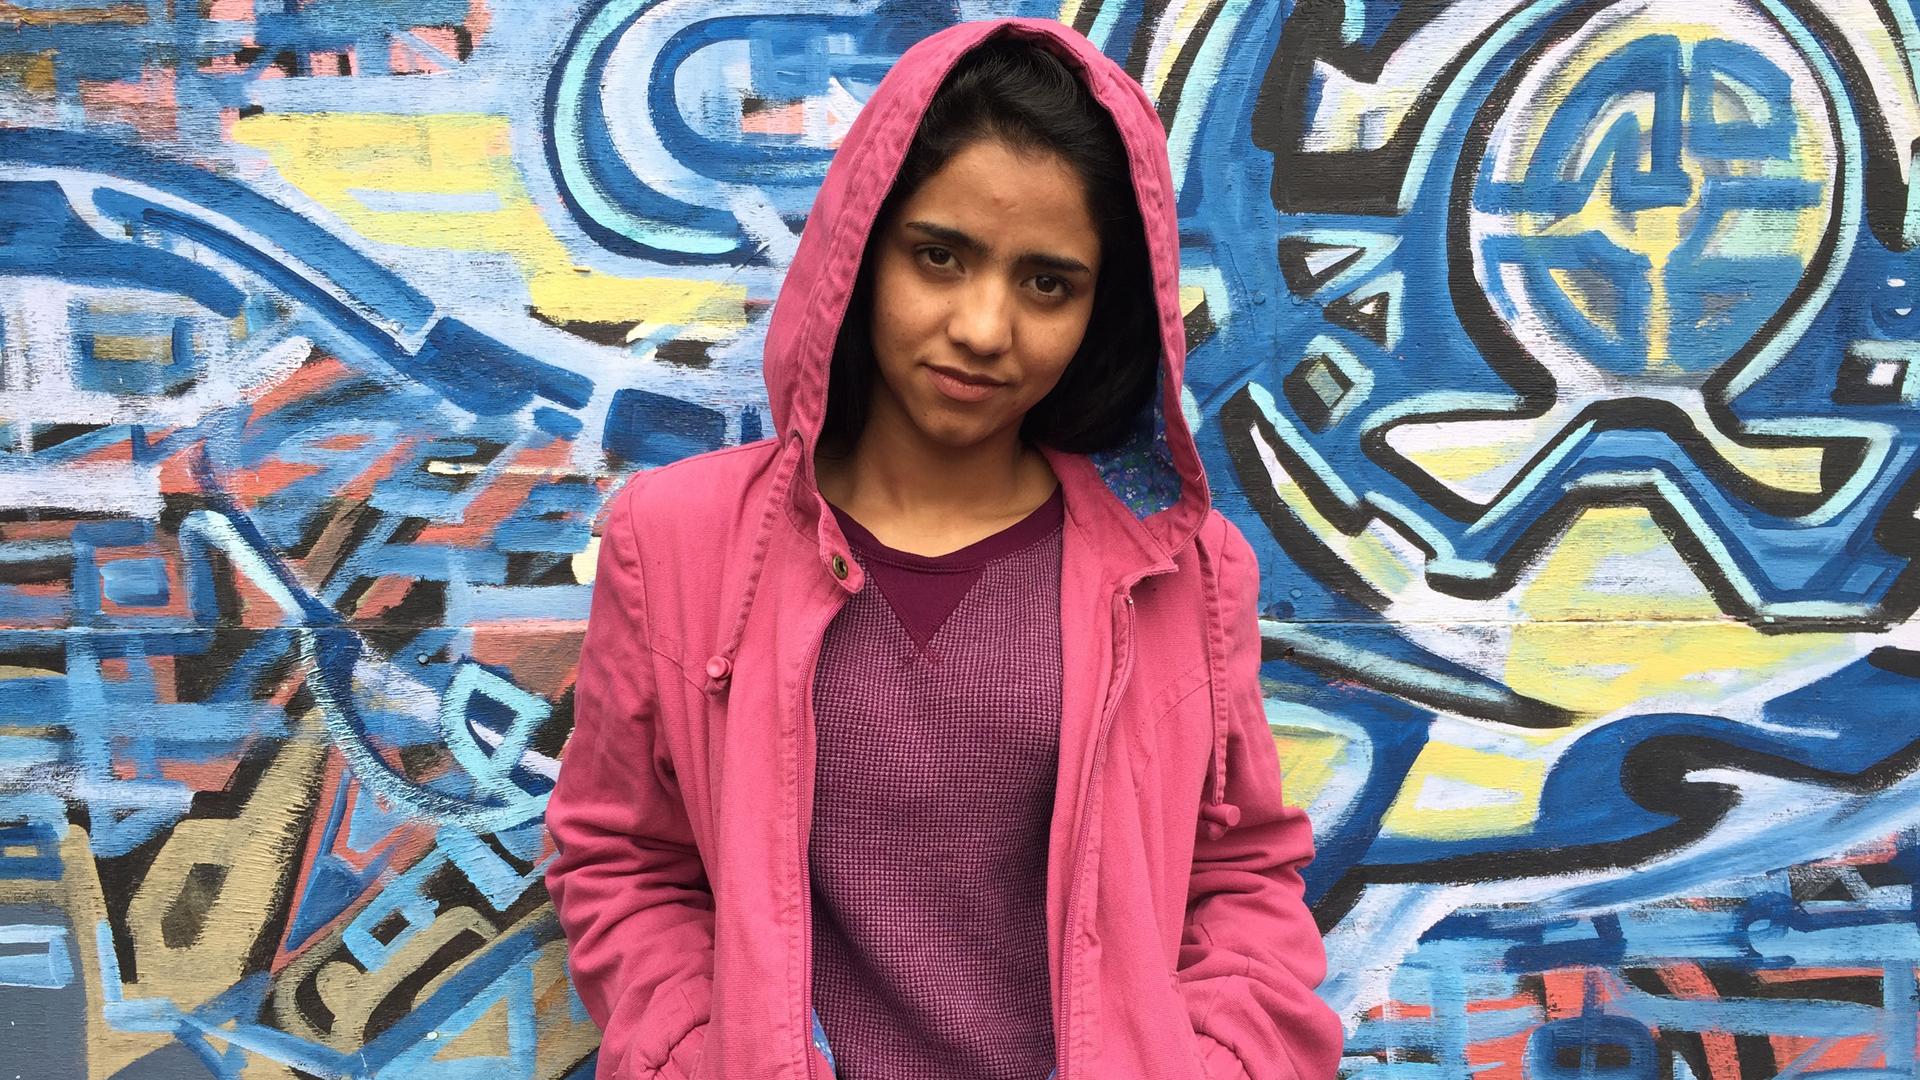 Afghan rapper Sonita Alizadeh narrowly escaped a forced marriage at 16 by writing the song 'Brides for Sale.' She recently visited West Oakland, CA, and was surprised that the U.S., like Iran and Afghanistan, has poor neighborhoods and homeless people.